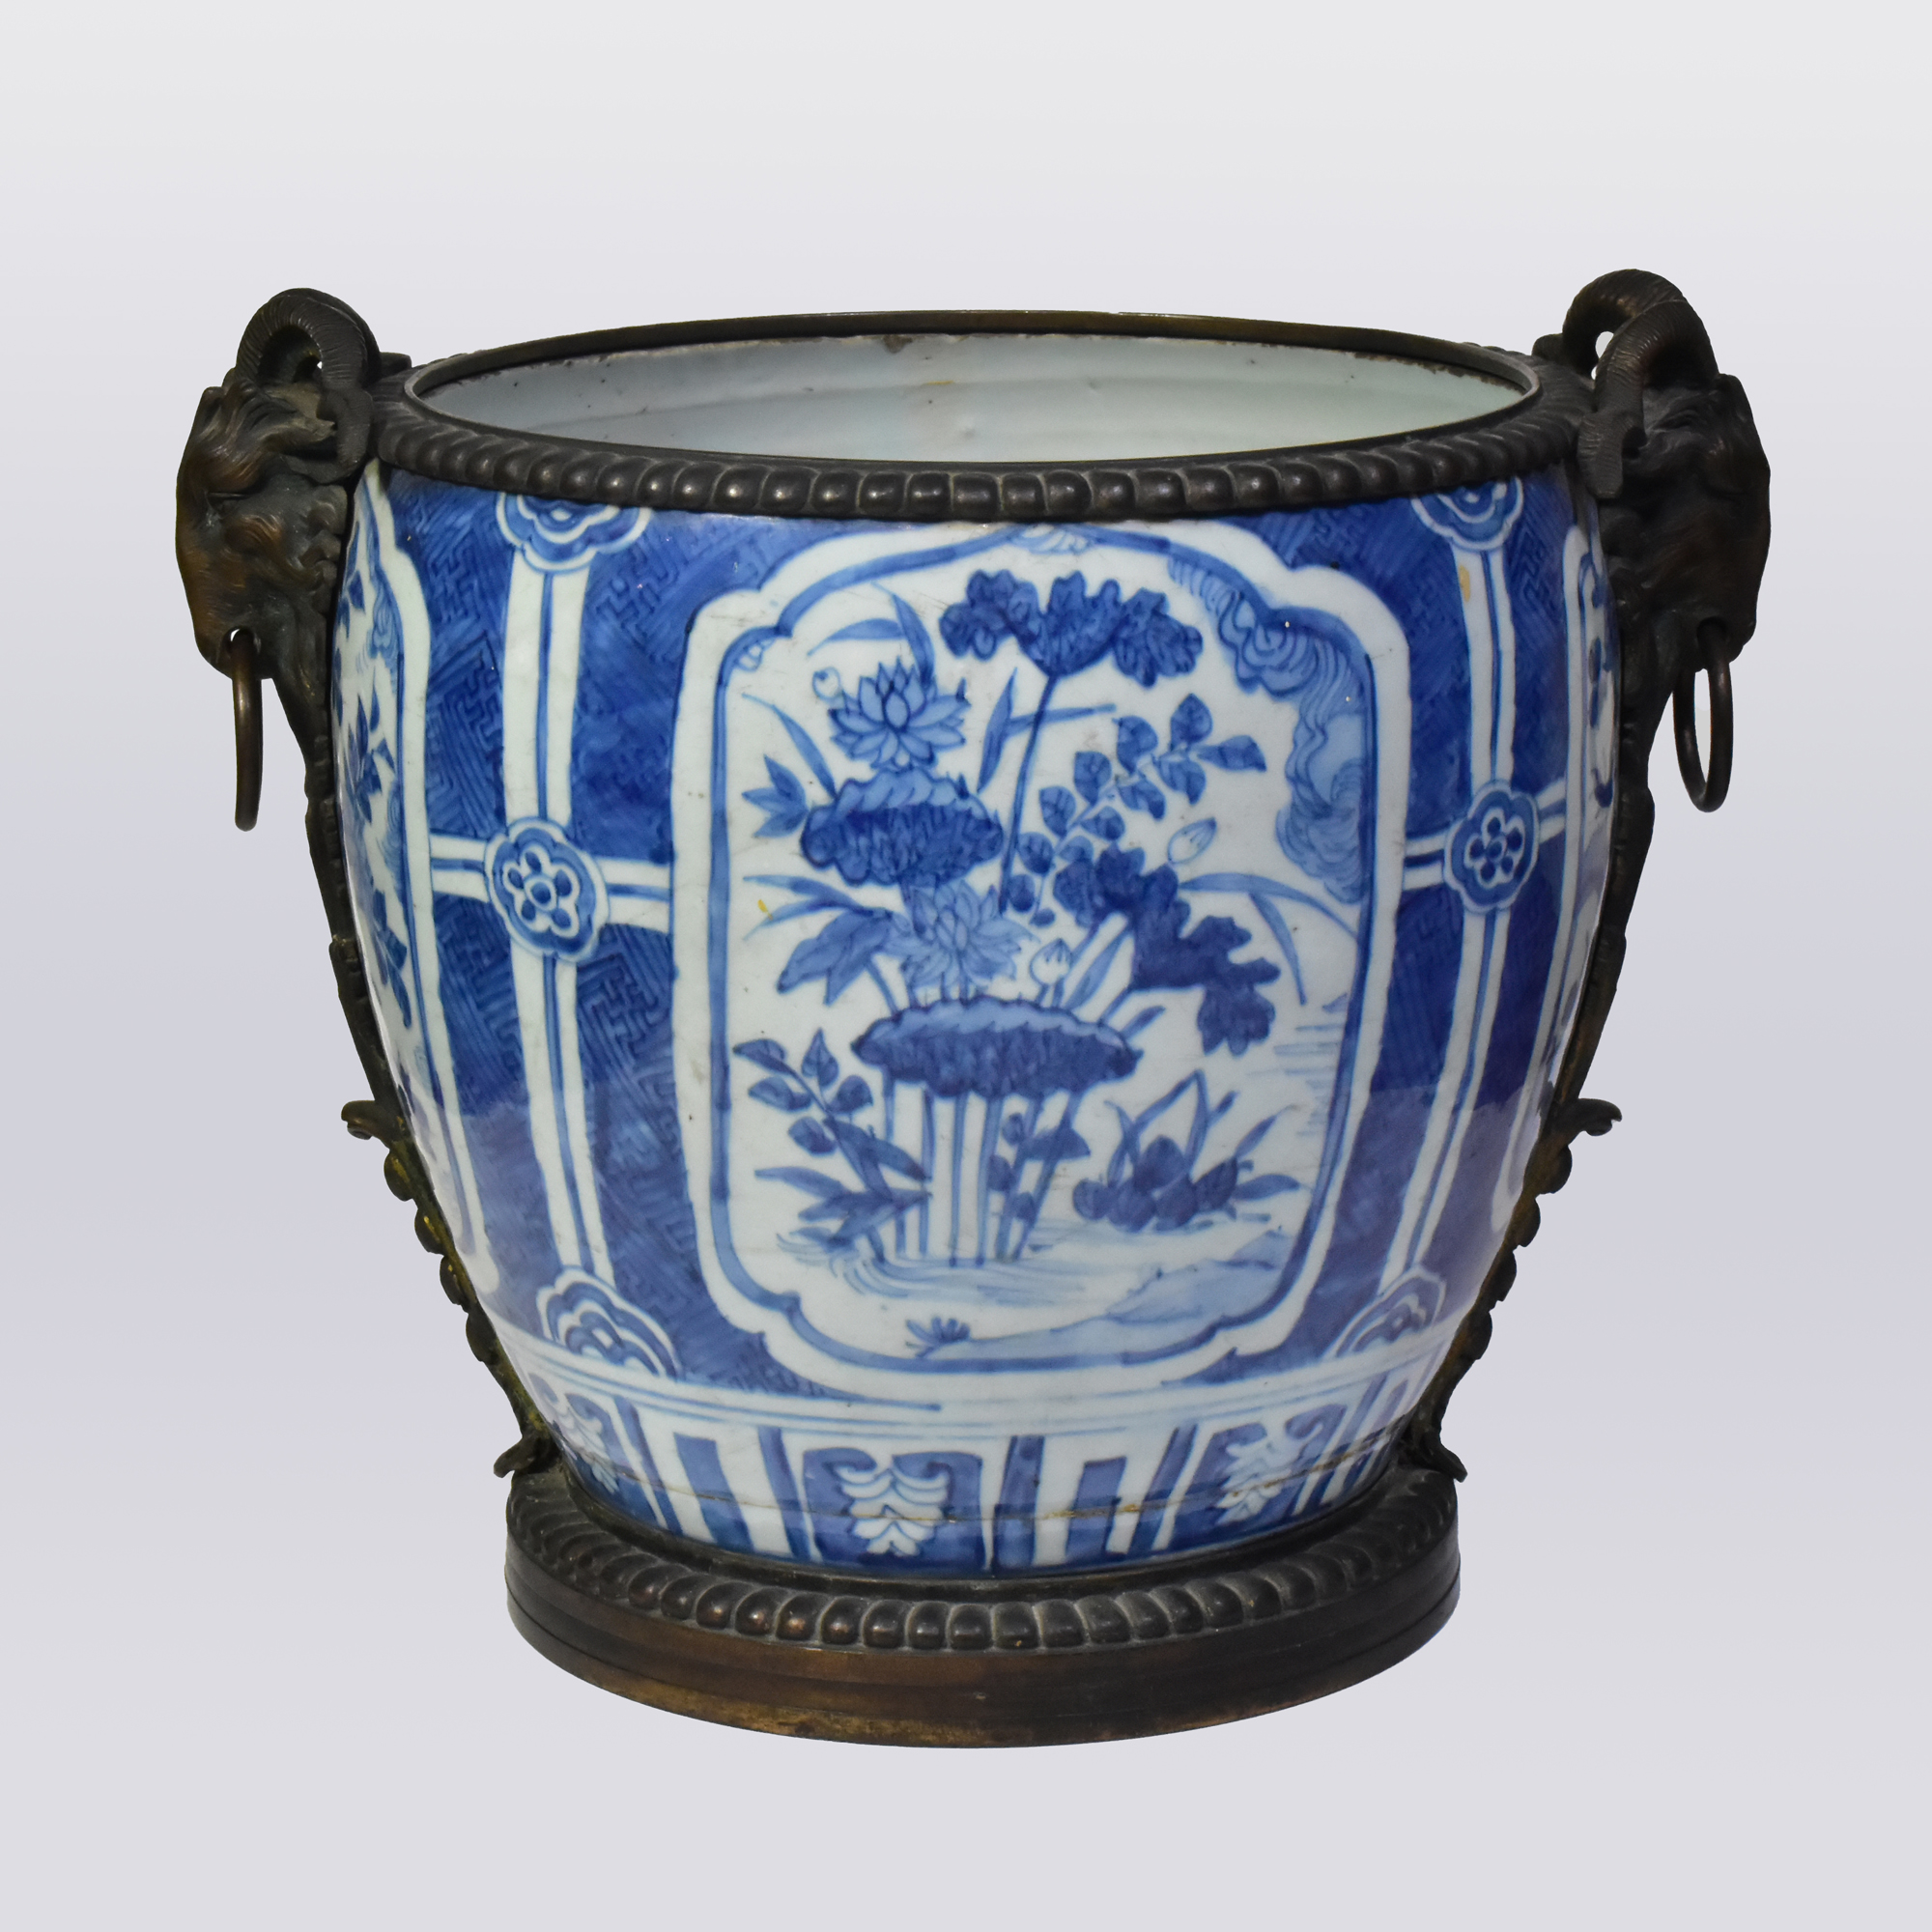 A LARGE CHINESE BLUE AND WHITE PORCELAIN GILT-BRONZE MOUNTED CACHEPOT, WANLI PERIOD, 1572 – 1620